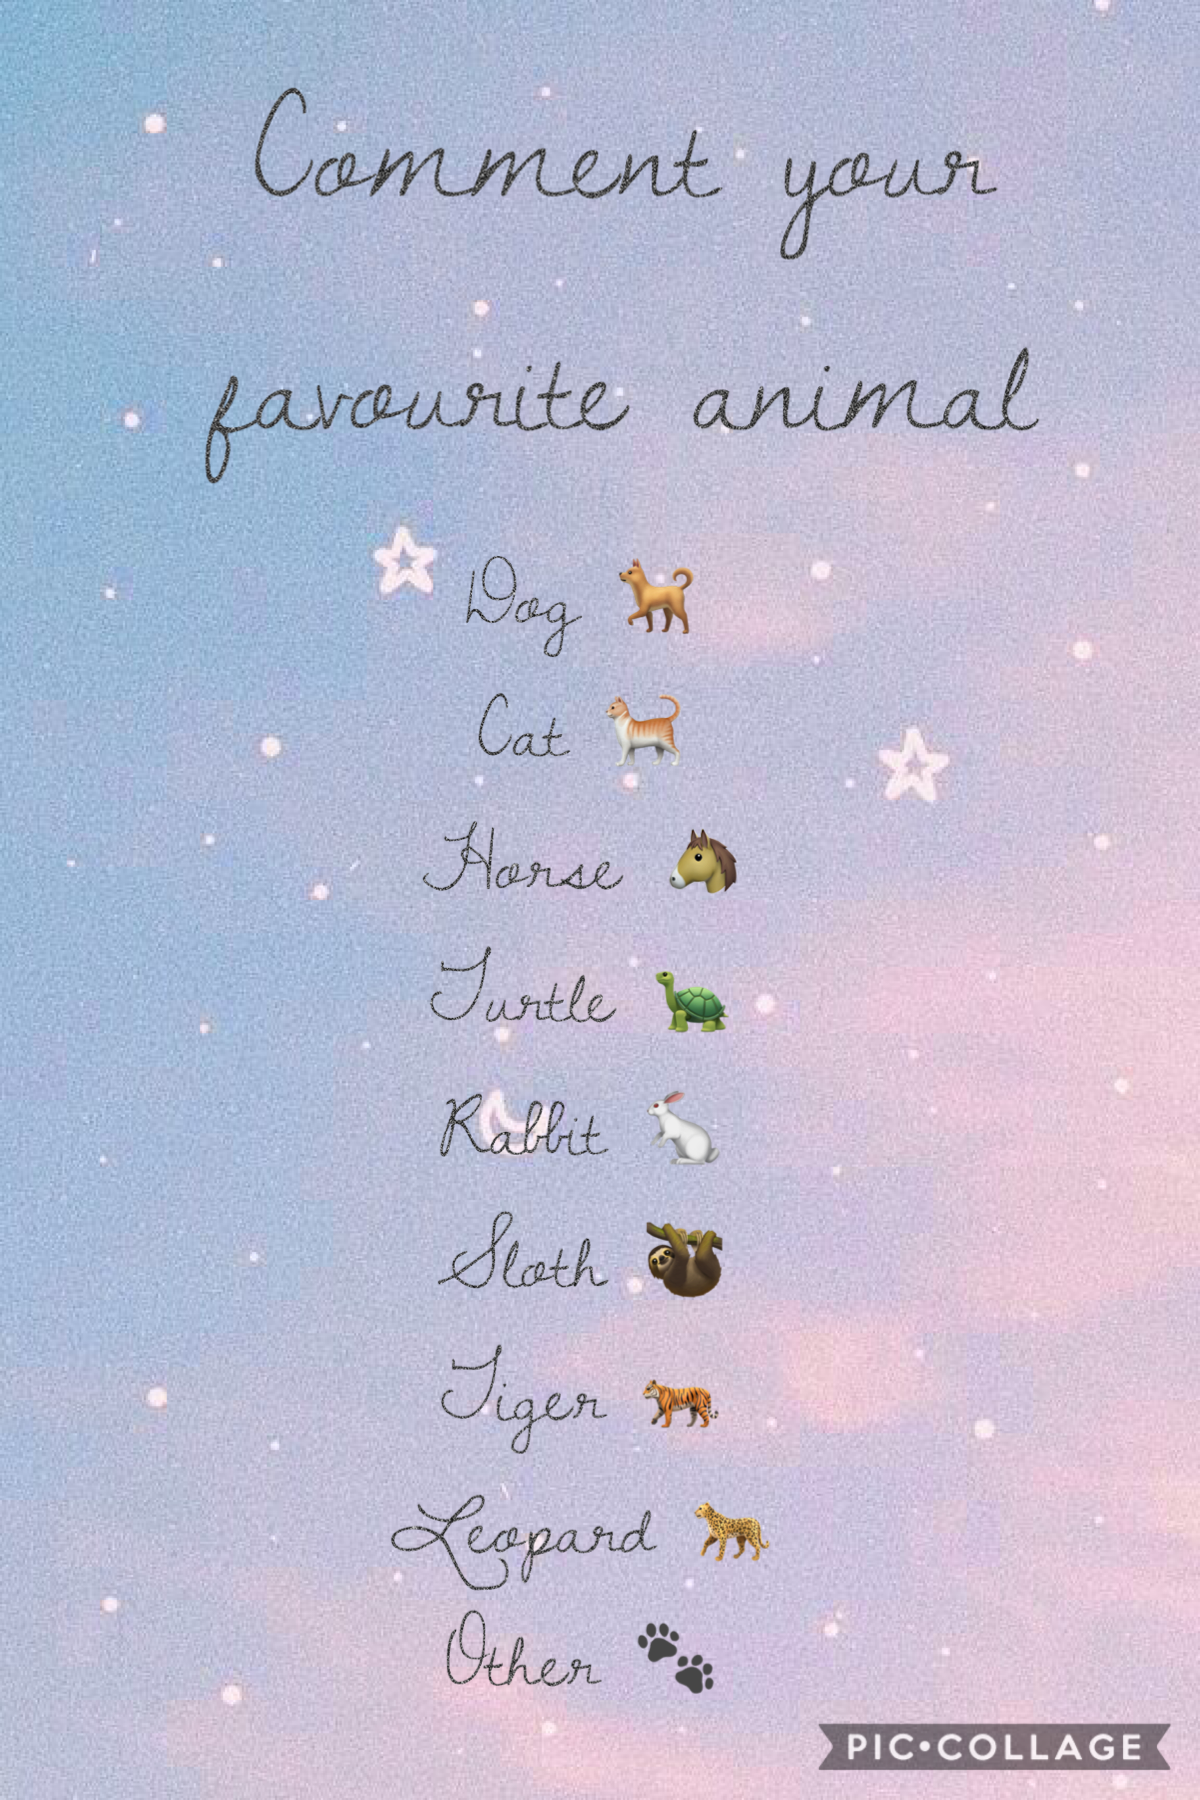 #comment down below your fave animal